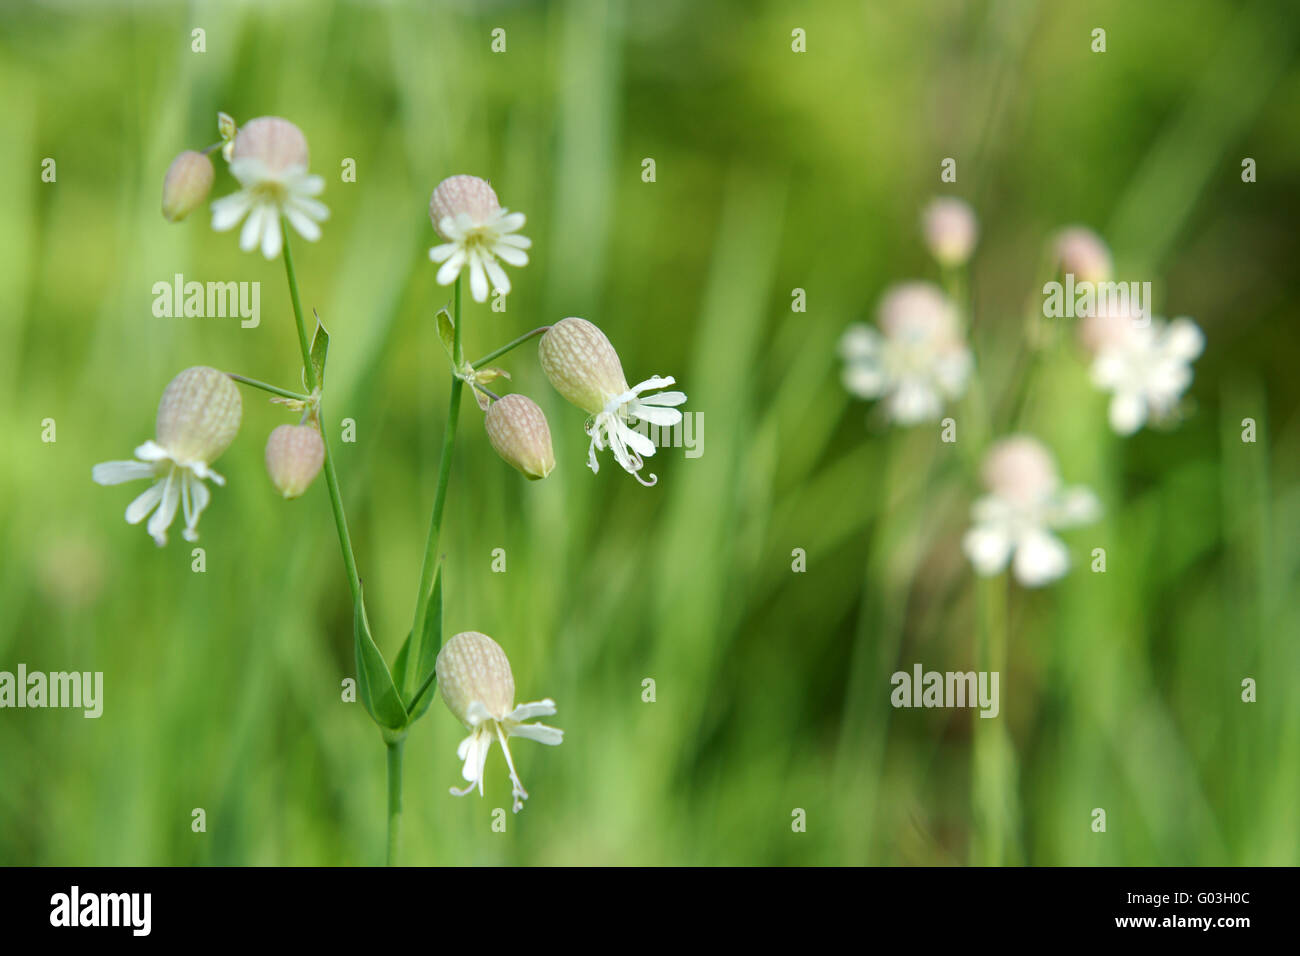 Beautiful dewy flowers of the Bladder Campion Stock Photo